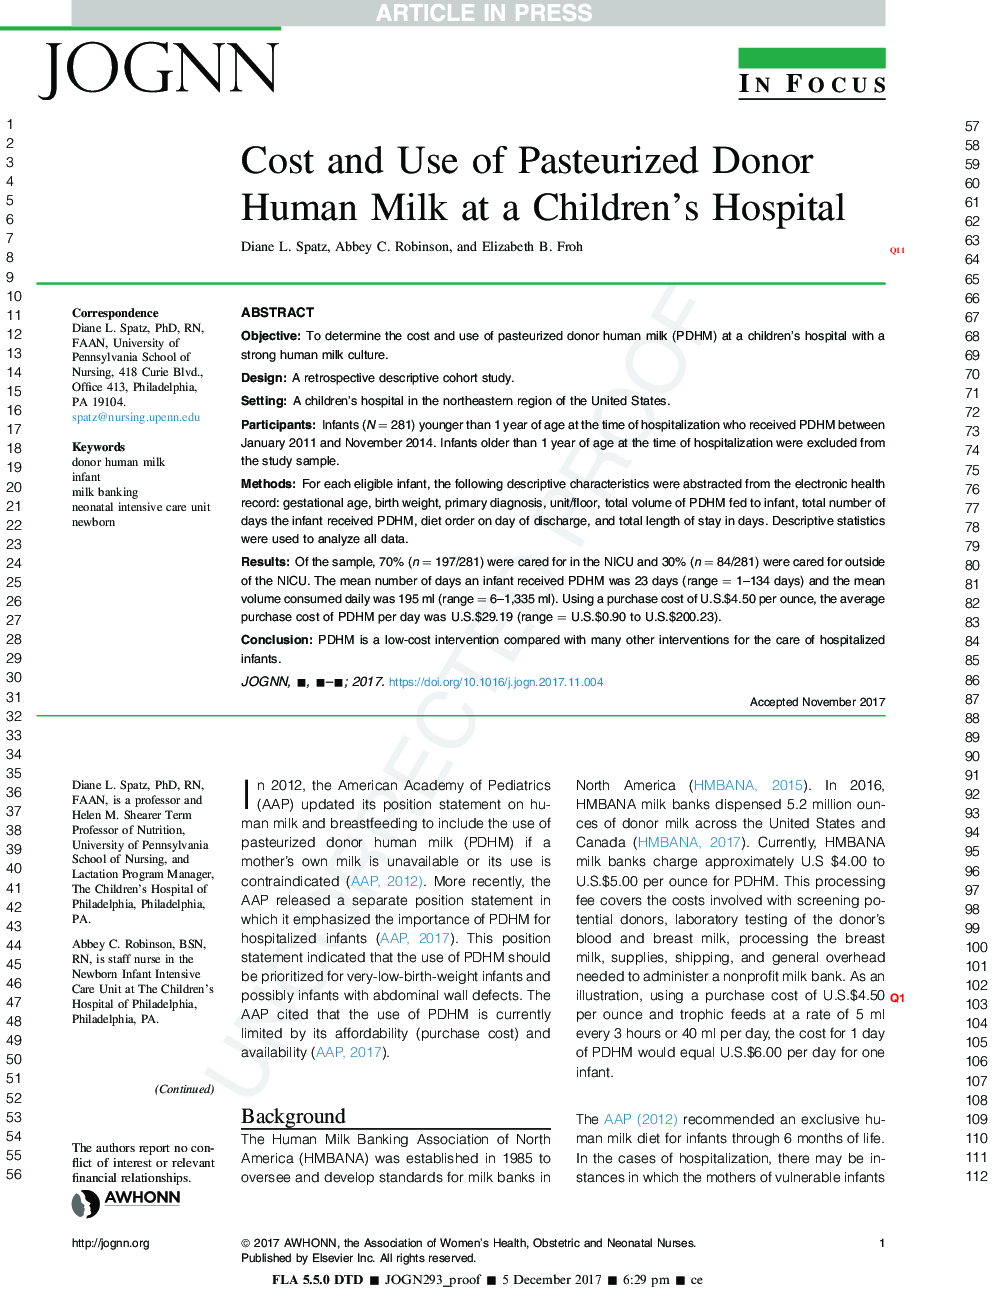 Cost and Use of Pasteurized Donor Human Milk at a Children's Hospital